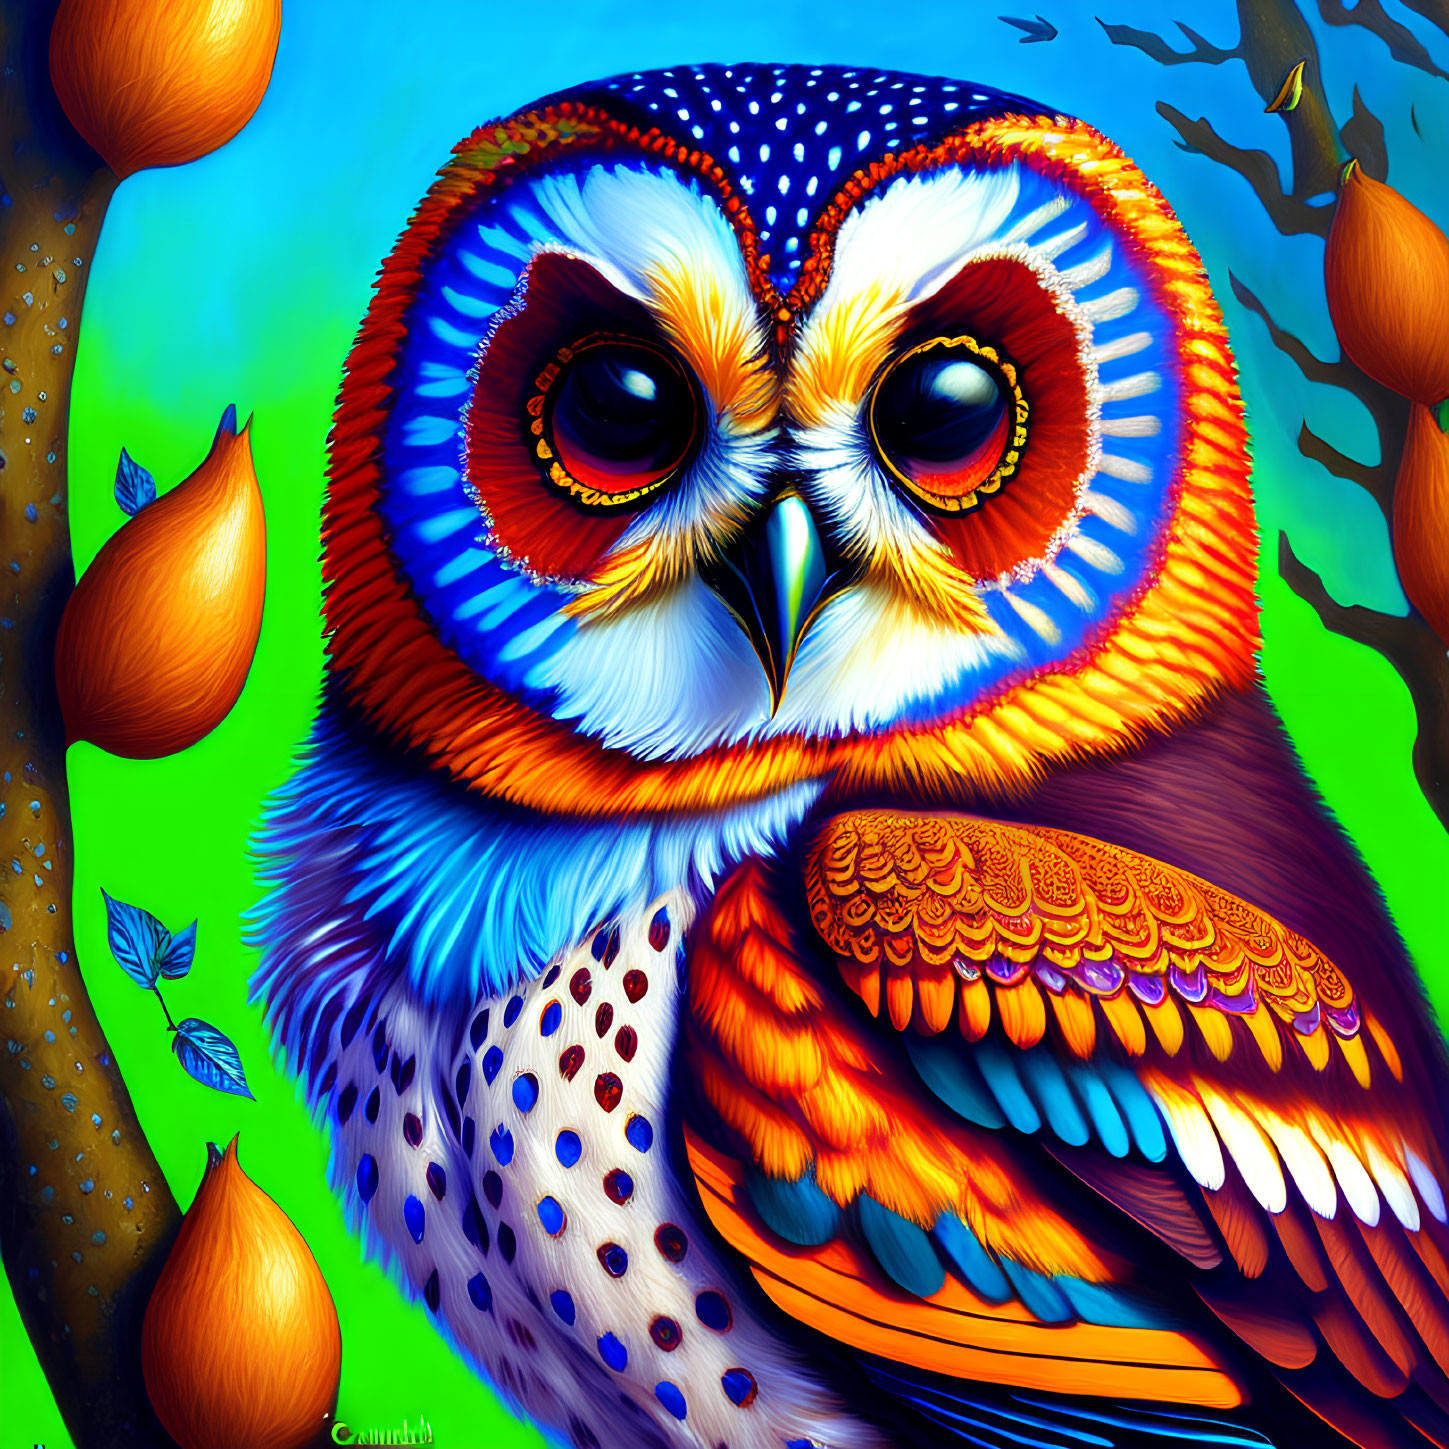 Colorful Owl Illustration with Blue and Orange Plumage on Teal Background